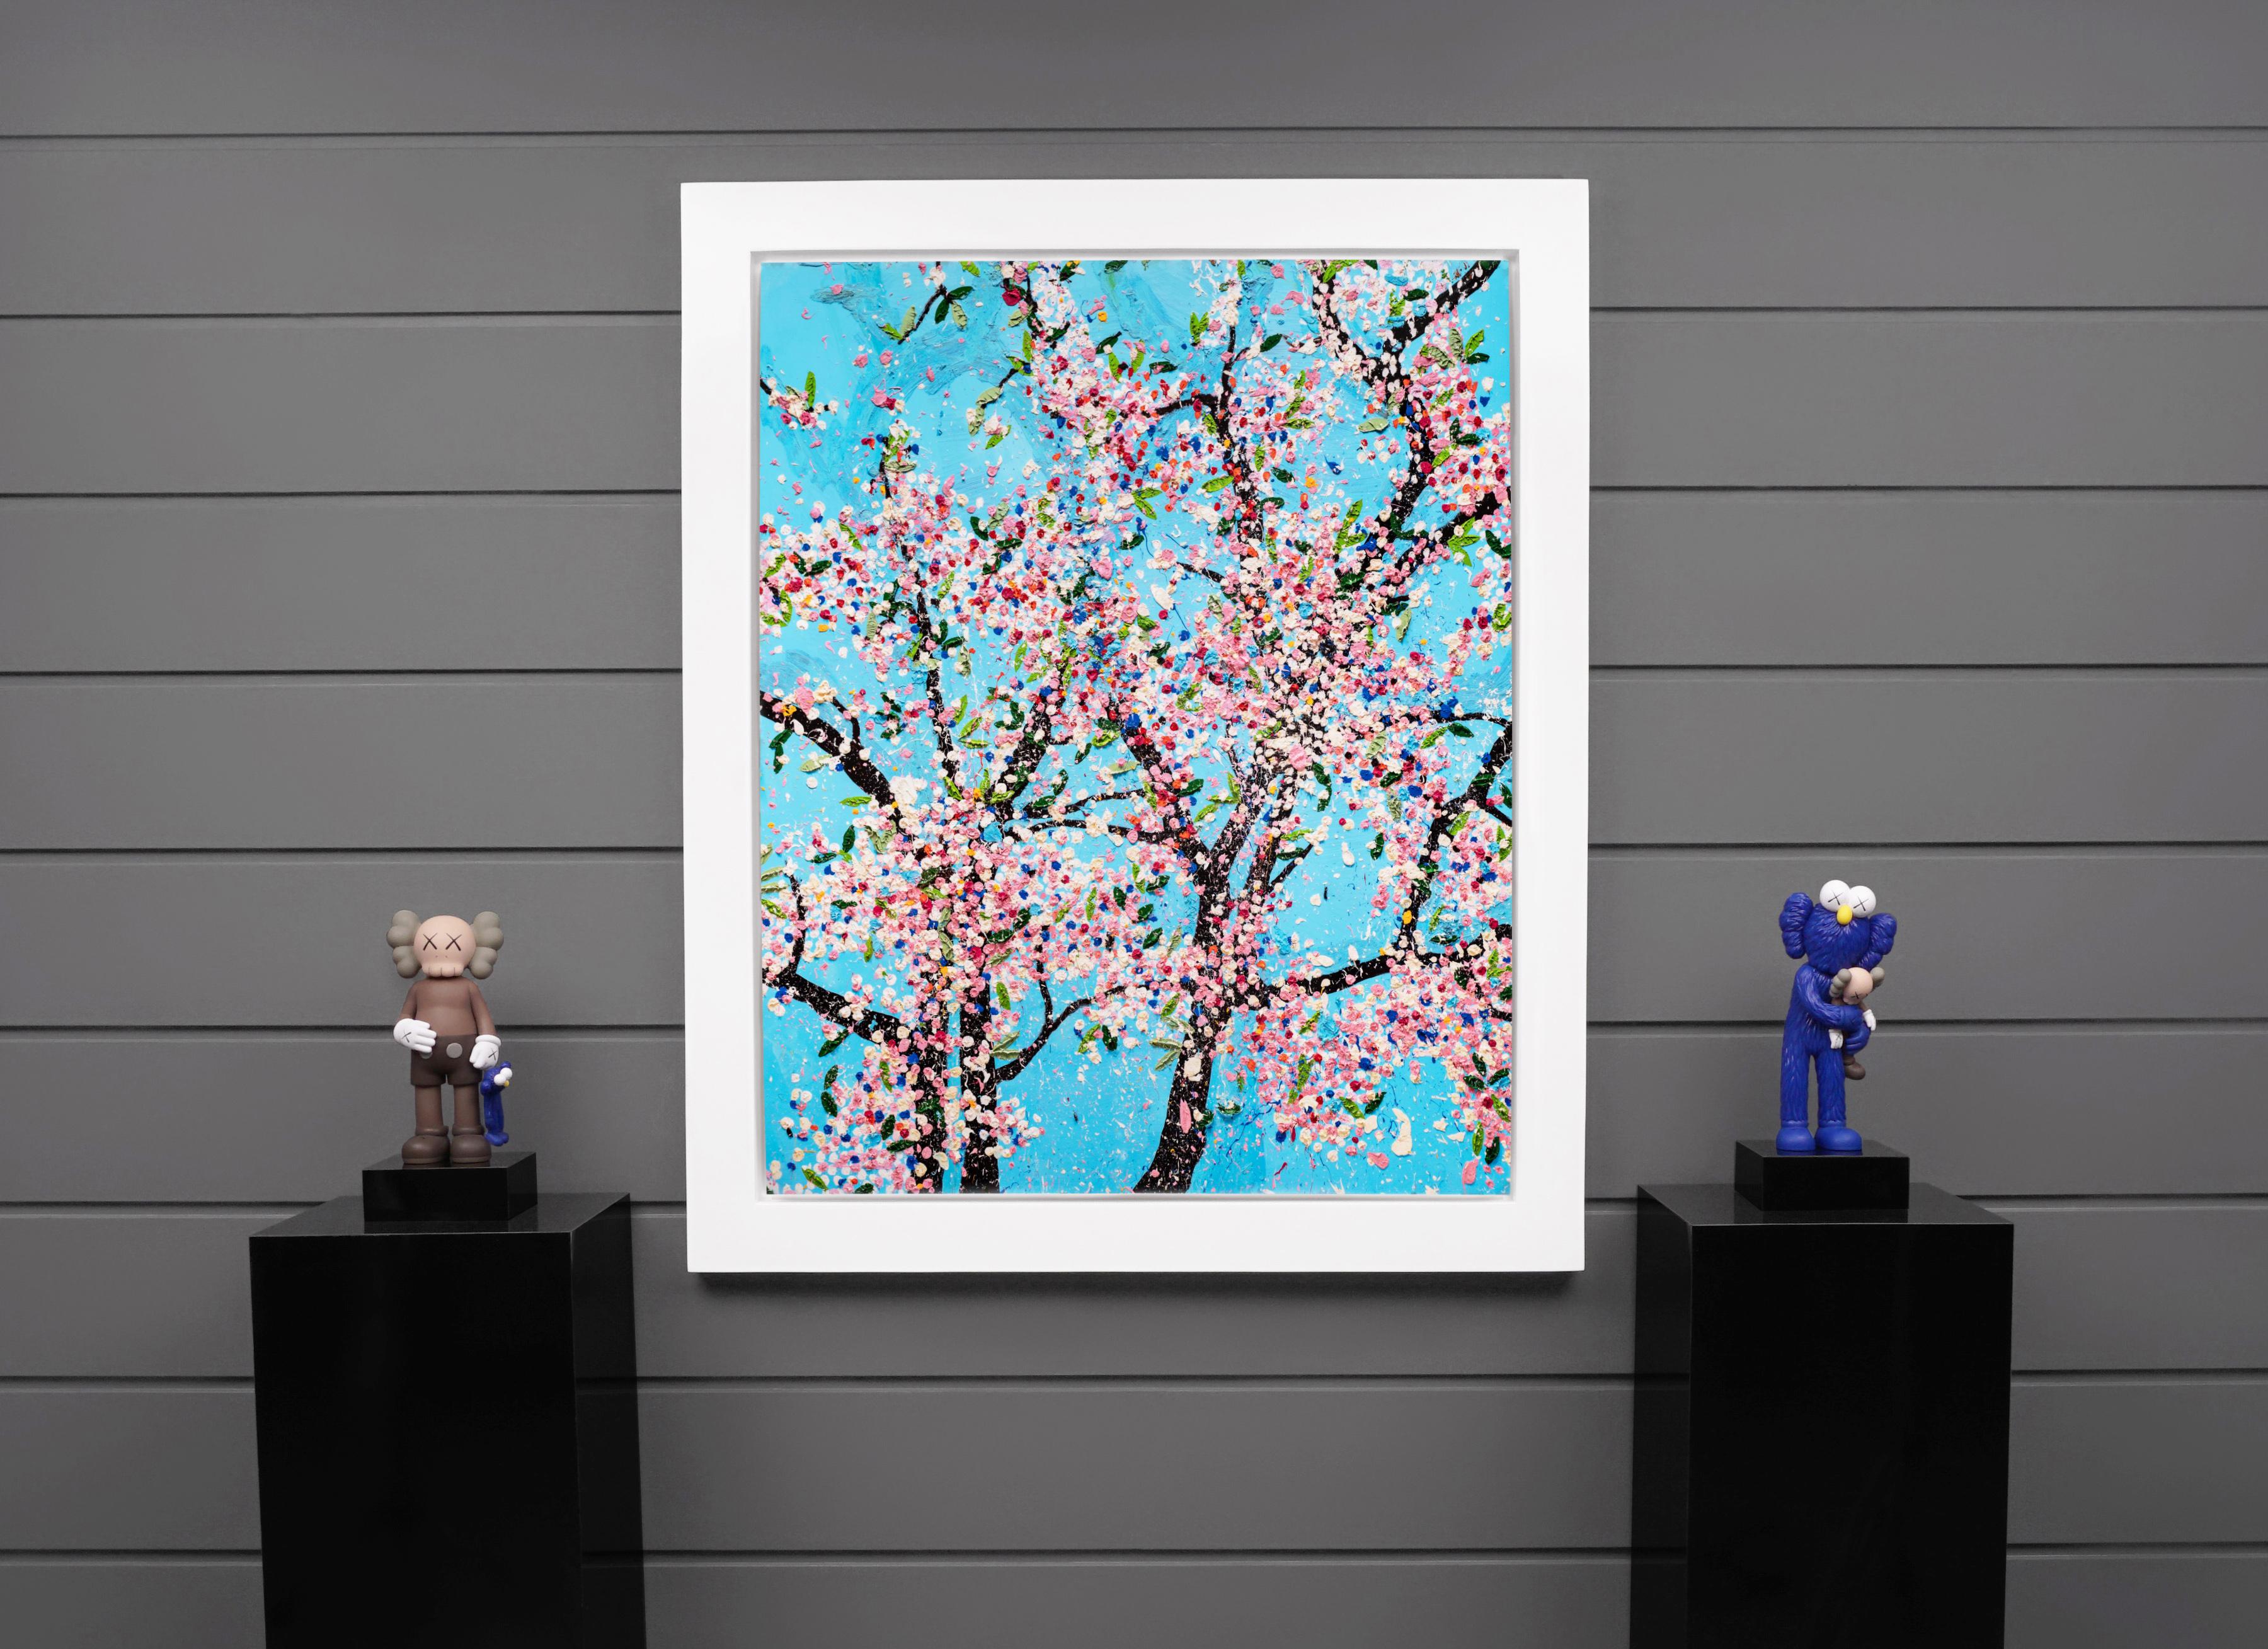 The contemporary pop art cherry blossom ‘Politeness’ is one of the eight from the iconic ‘Virtues’ series by Damien Hirst, the laminated giclée print on aluminum panel was created in 2021 as a reflection of his latest exploration as a master